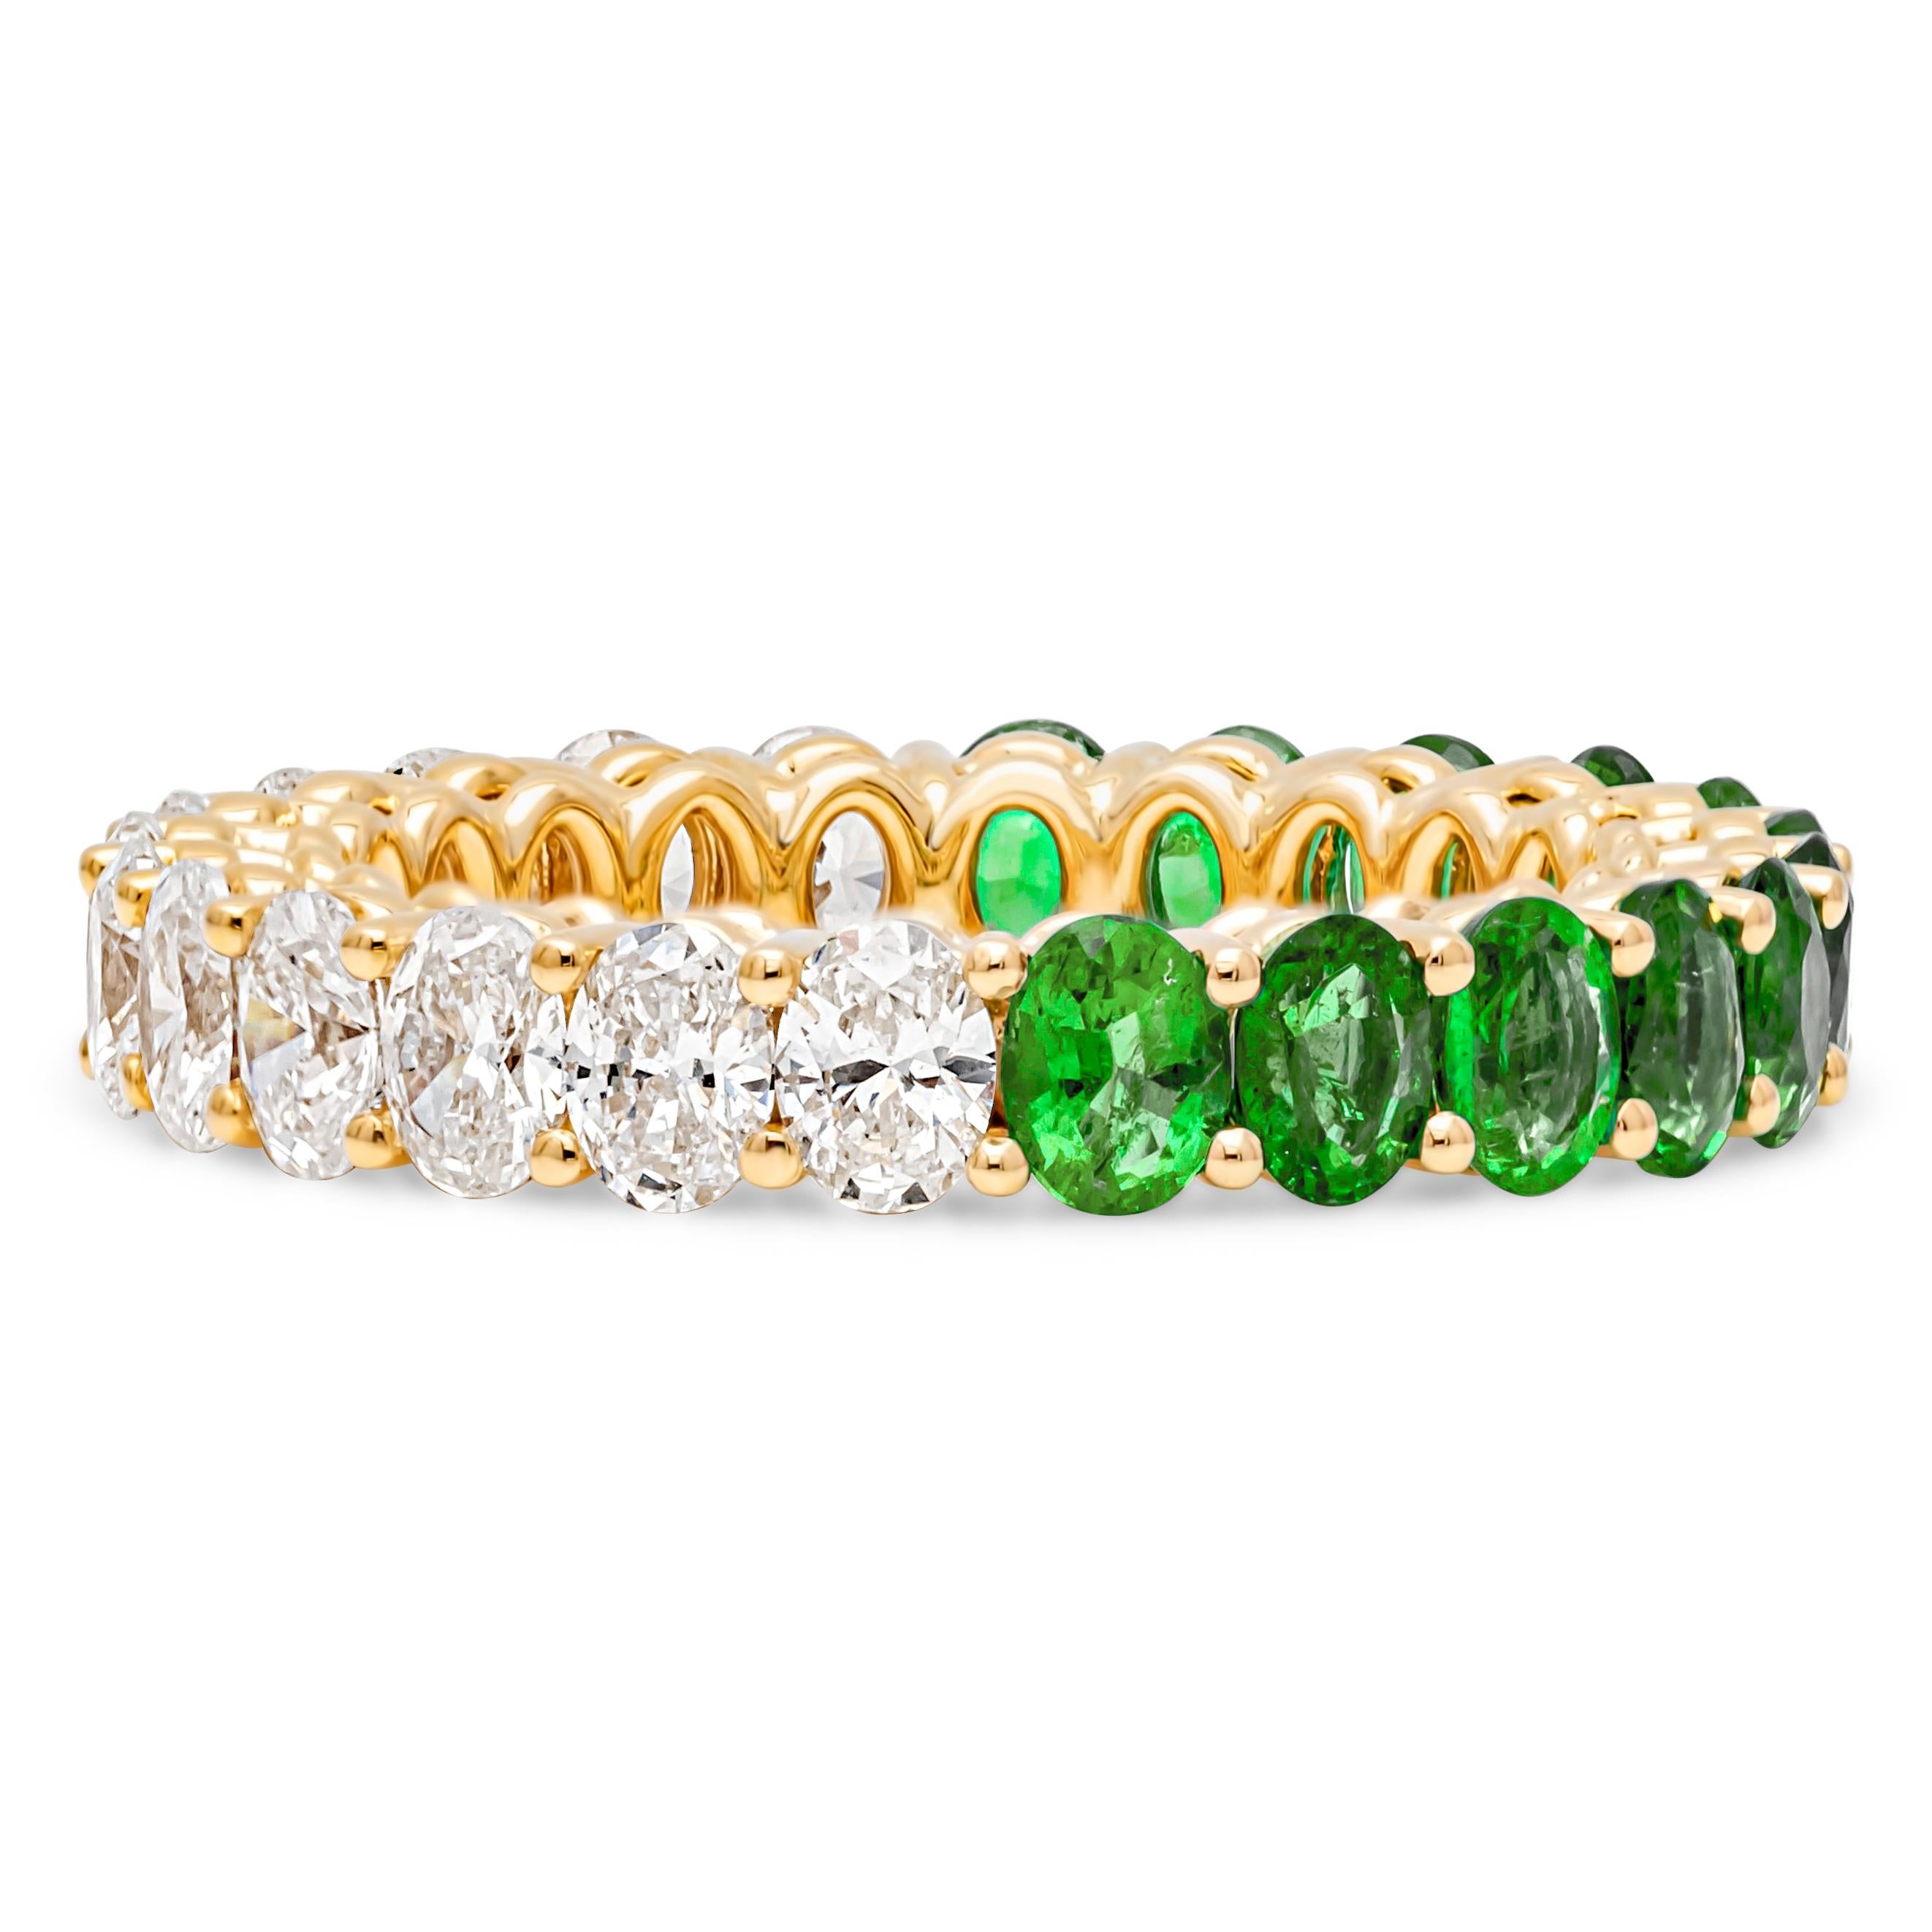 A beautiful and vibrant eternity wedding band style showcasing a color-rich 12 oval cut green emerald weighing 1.69 carats total and 10 brilliant oval cut diamonds weighing 1.68 carats total, set in a shared prong setting. Eternity set in an open